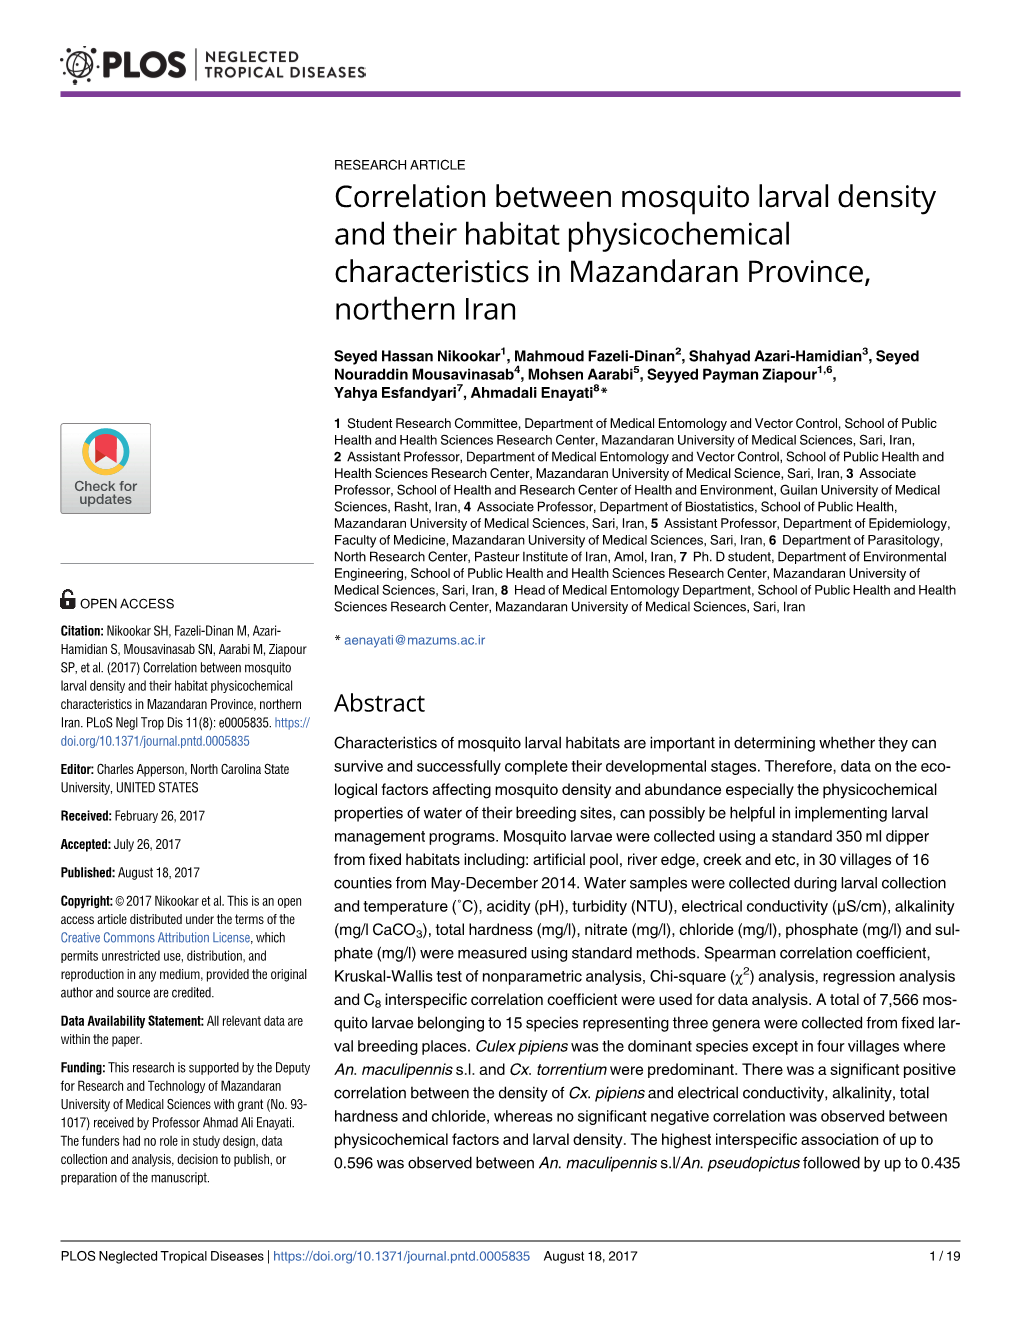 Correlation Between Mosquito Larval Density and Their Habitat Physicochemical Characteristics in Mazandaran Province, Northern Iran